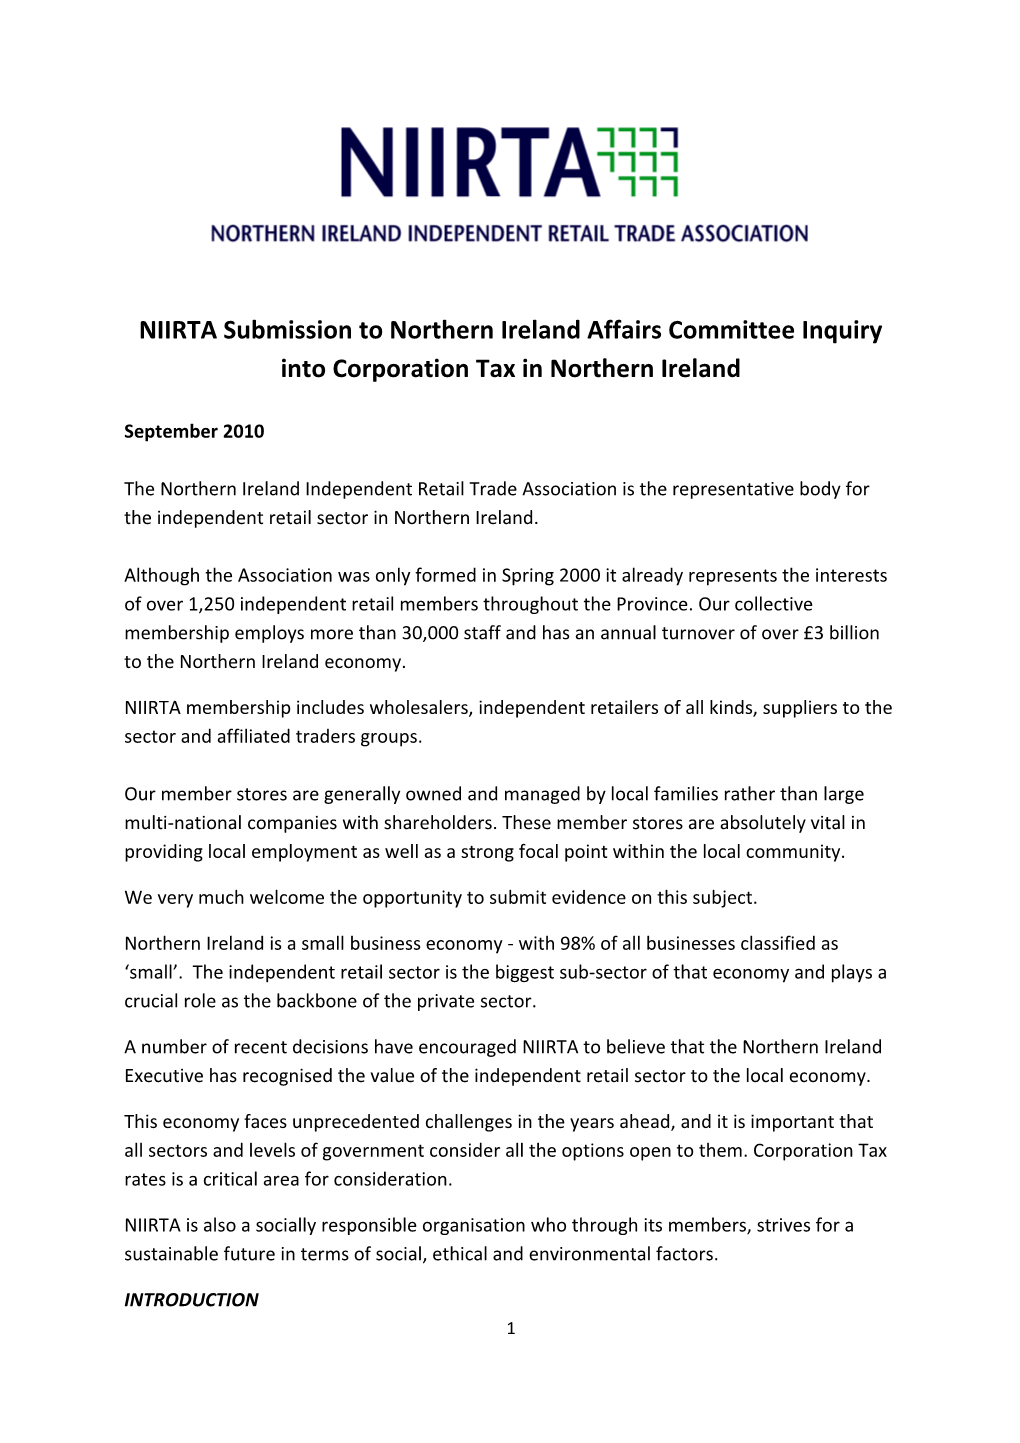 NIIRTA Submission to Northern Ireland Affairs Committee Inquiry Into Corporation Tax In